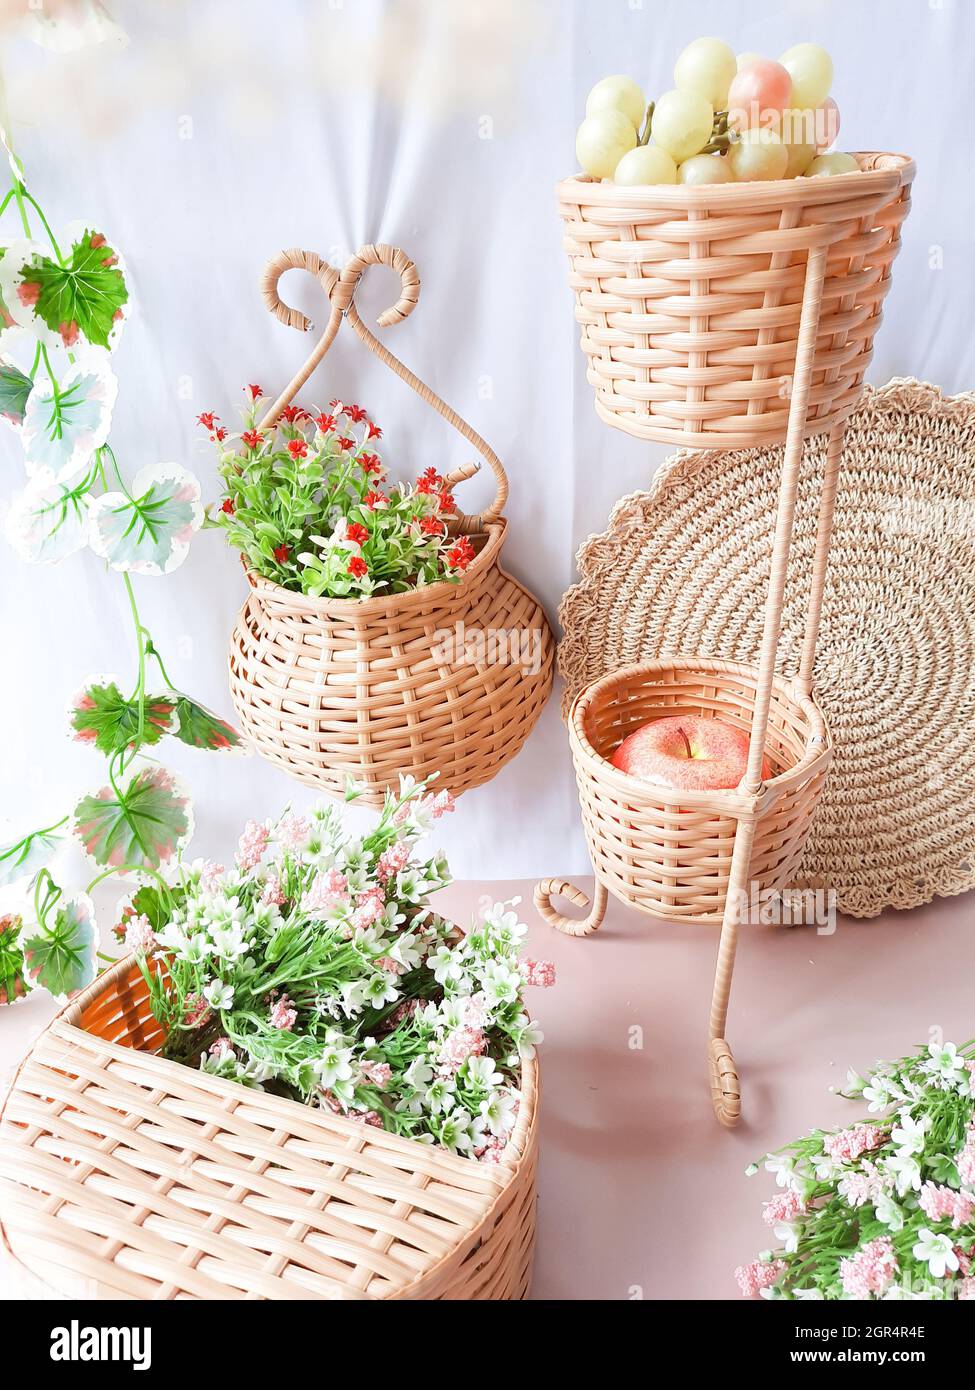 High Angle View Of Potted Plants In Basket On Table Stock Photo